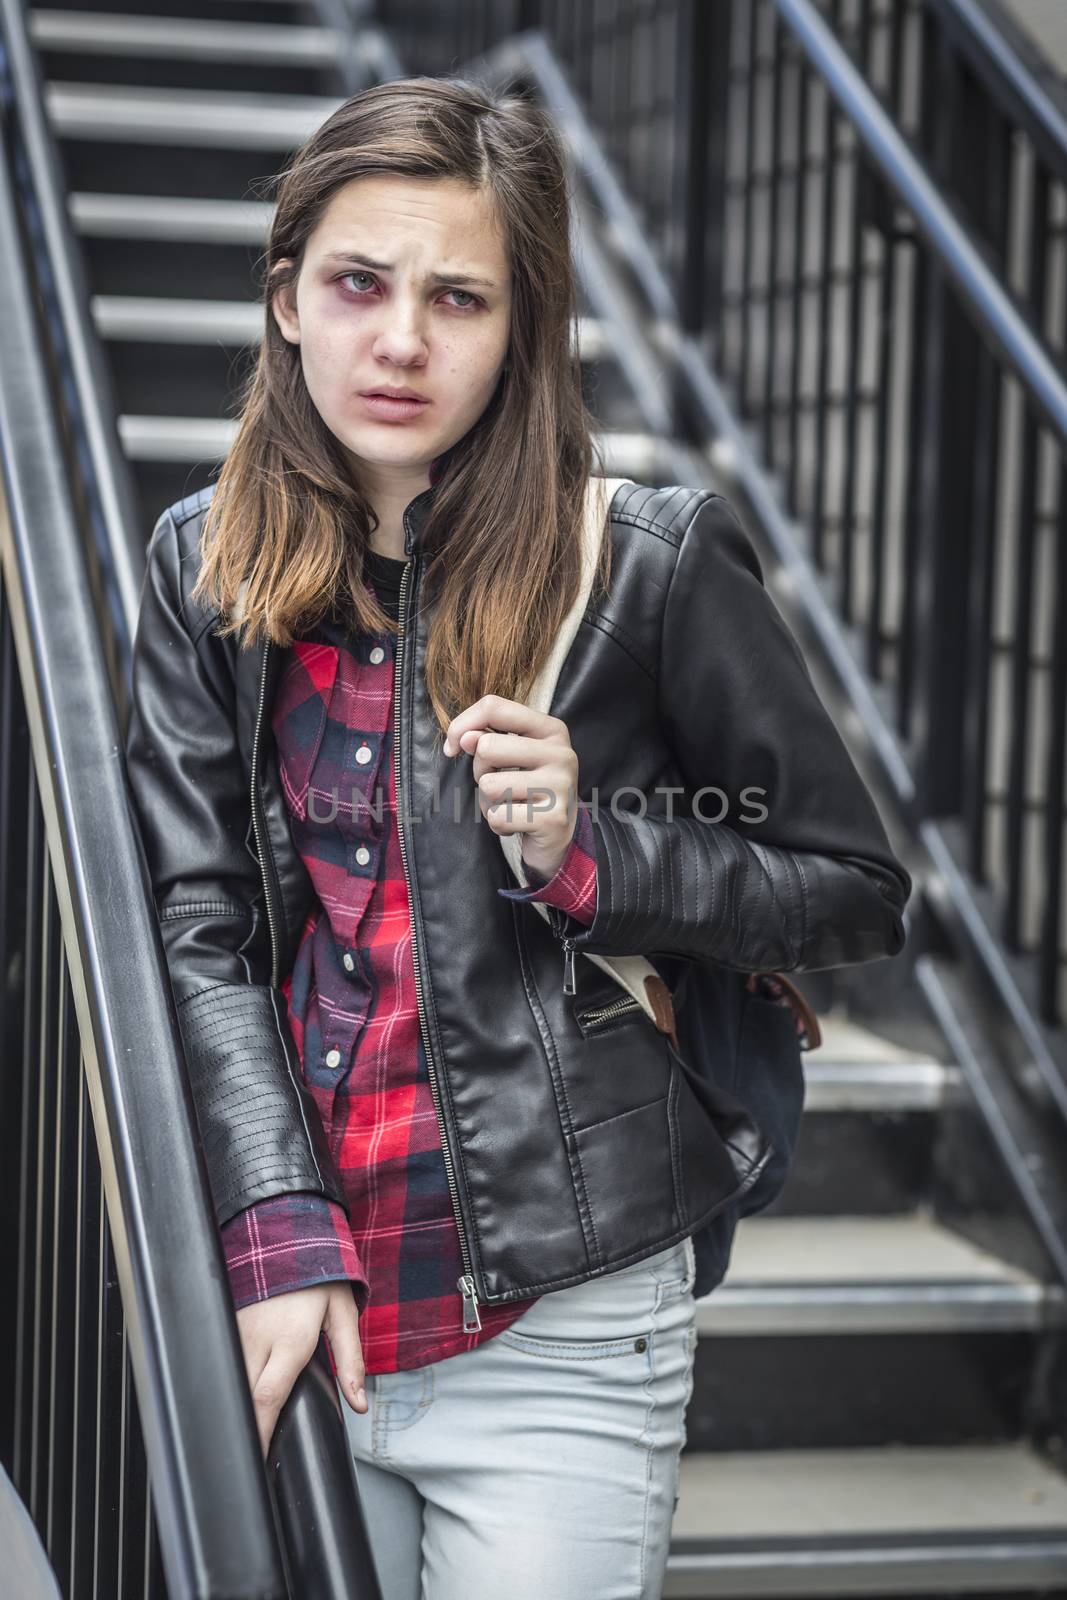 Young Badly Bruised and Frightened Girl with Backpack on Staircase.